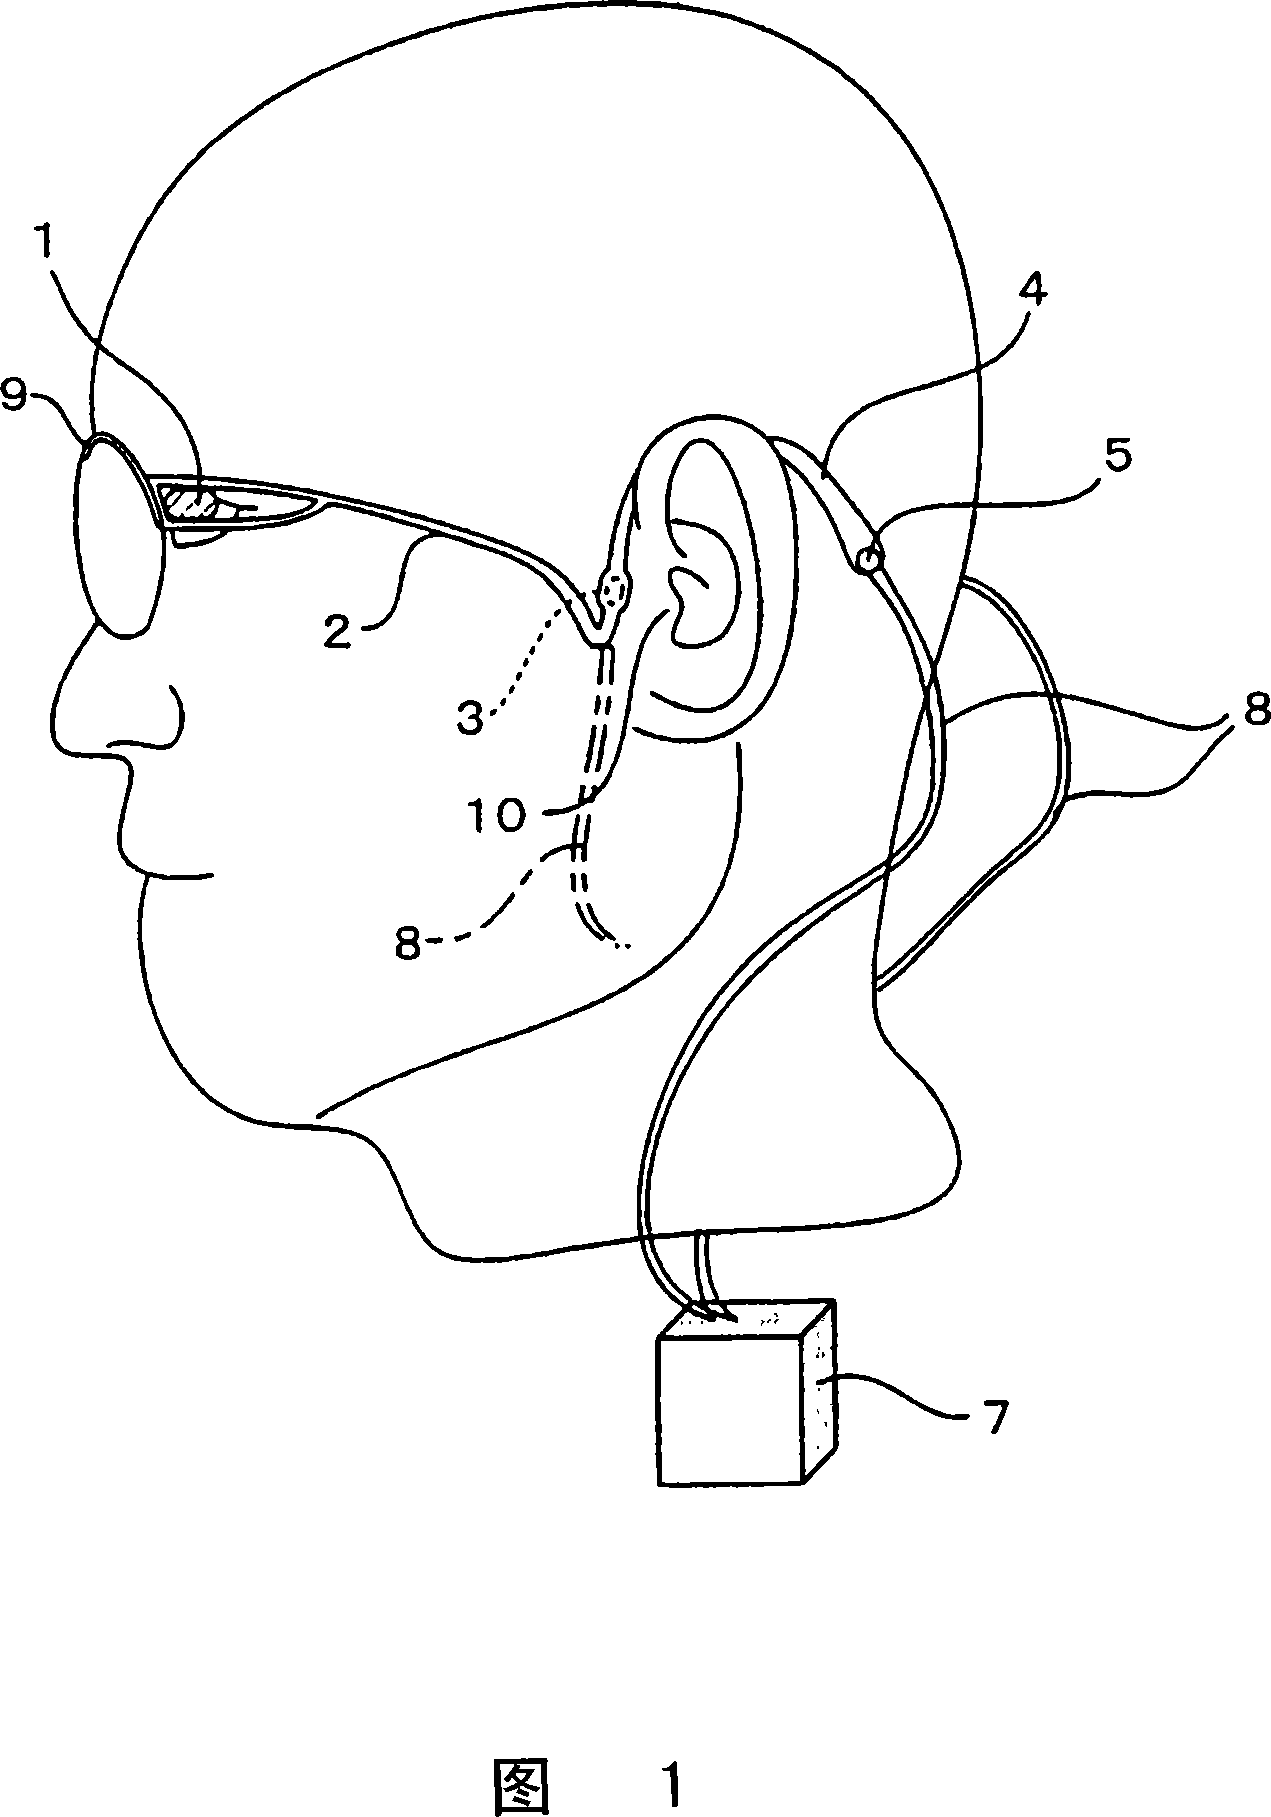 Spectacle type communication device